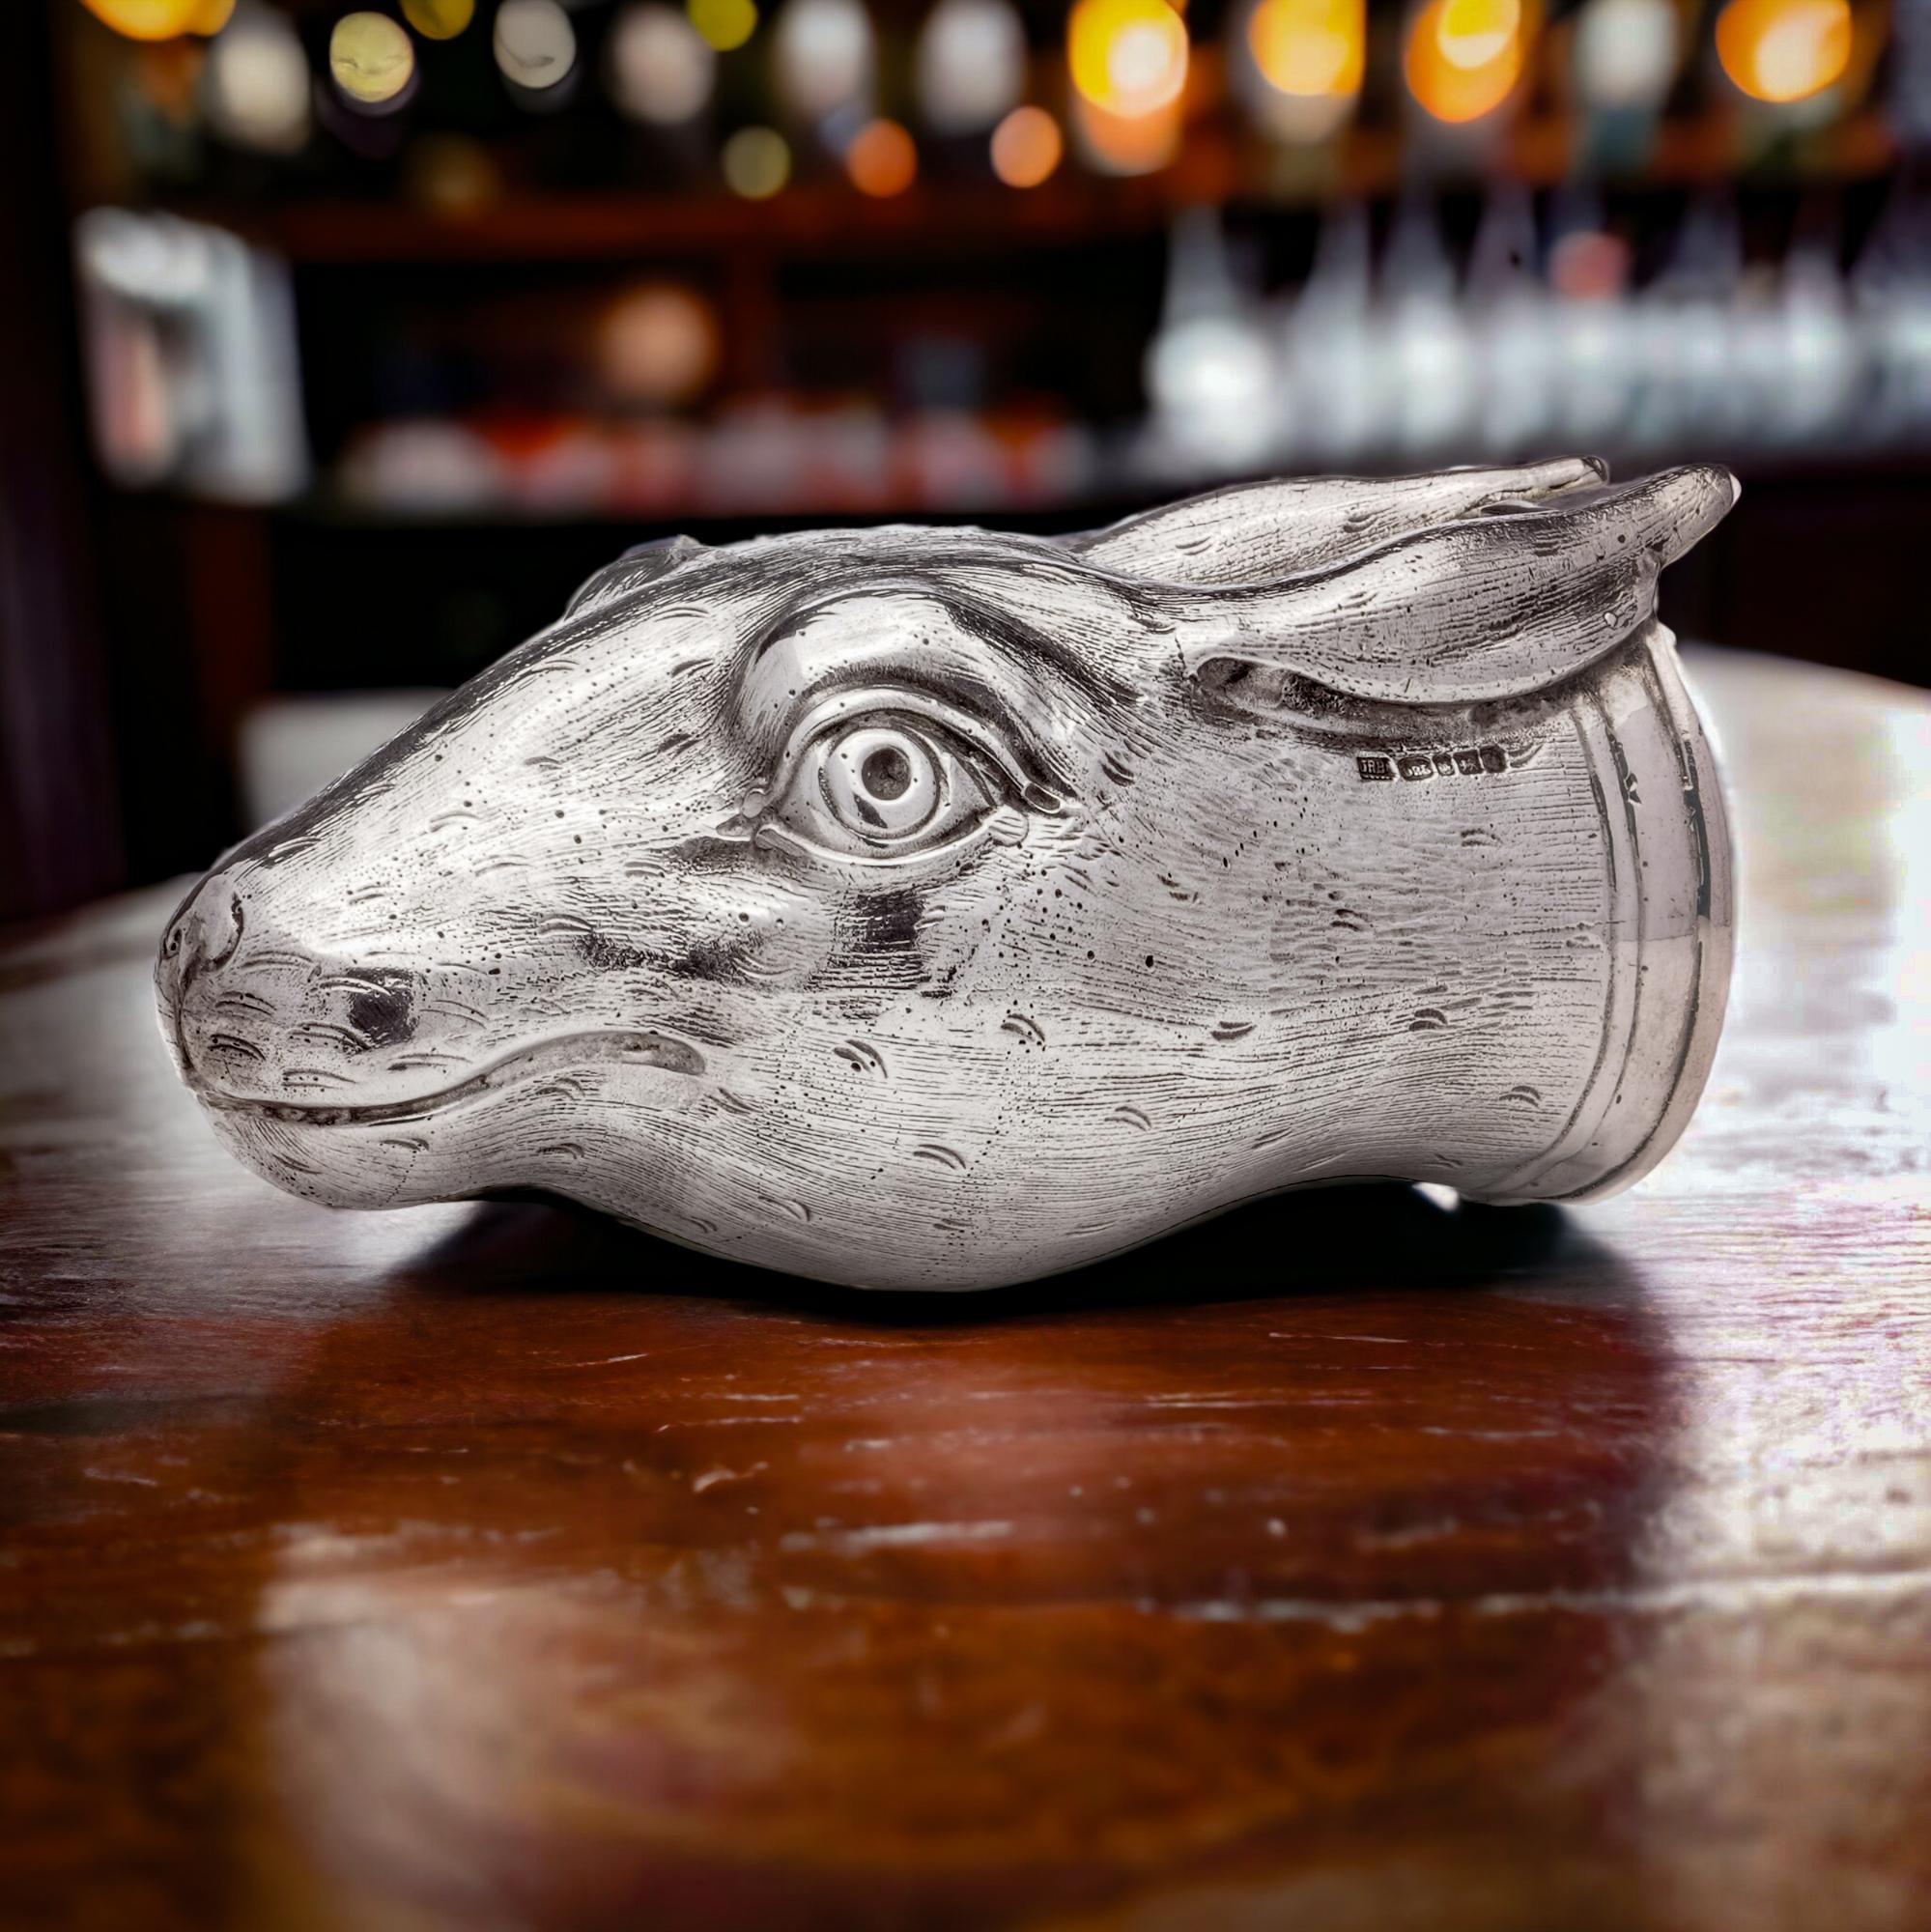 Exceptional Modern Sterling Silver Stirrup Cup Shaped as a Rabbit.
Maker: John Reginald Burrows.
Made in the United Kingdom, Birmingham 2008.
Fully hallmarked.

Crafted by the renowned silversmith, John Reginald Burrows, this piece is a nod to the